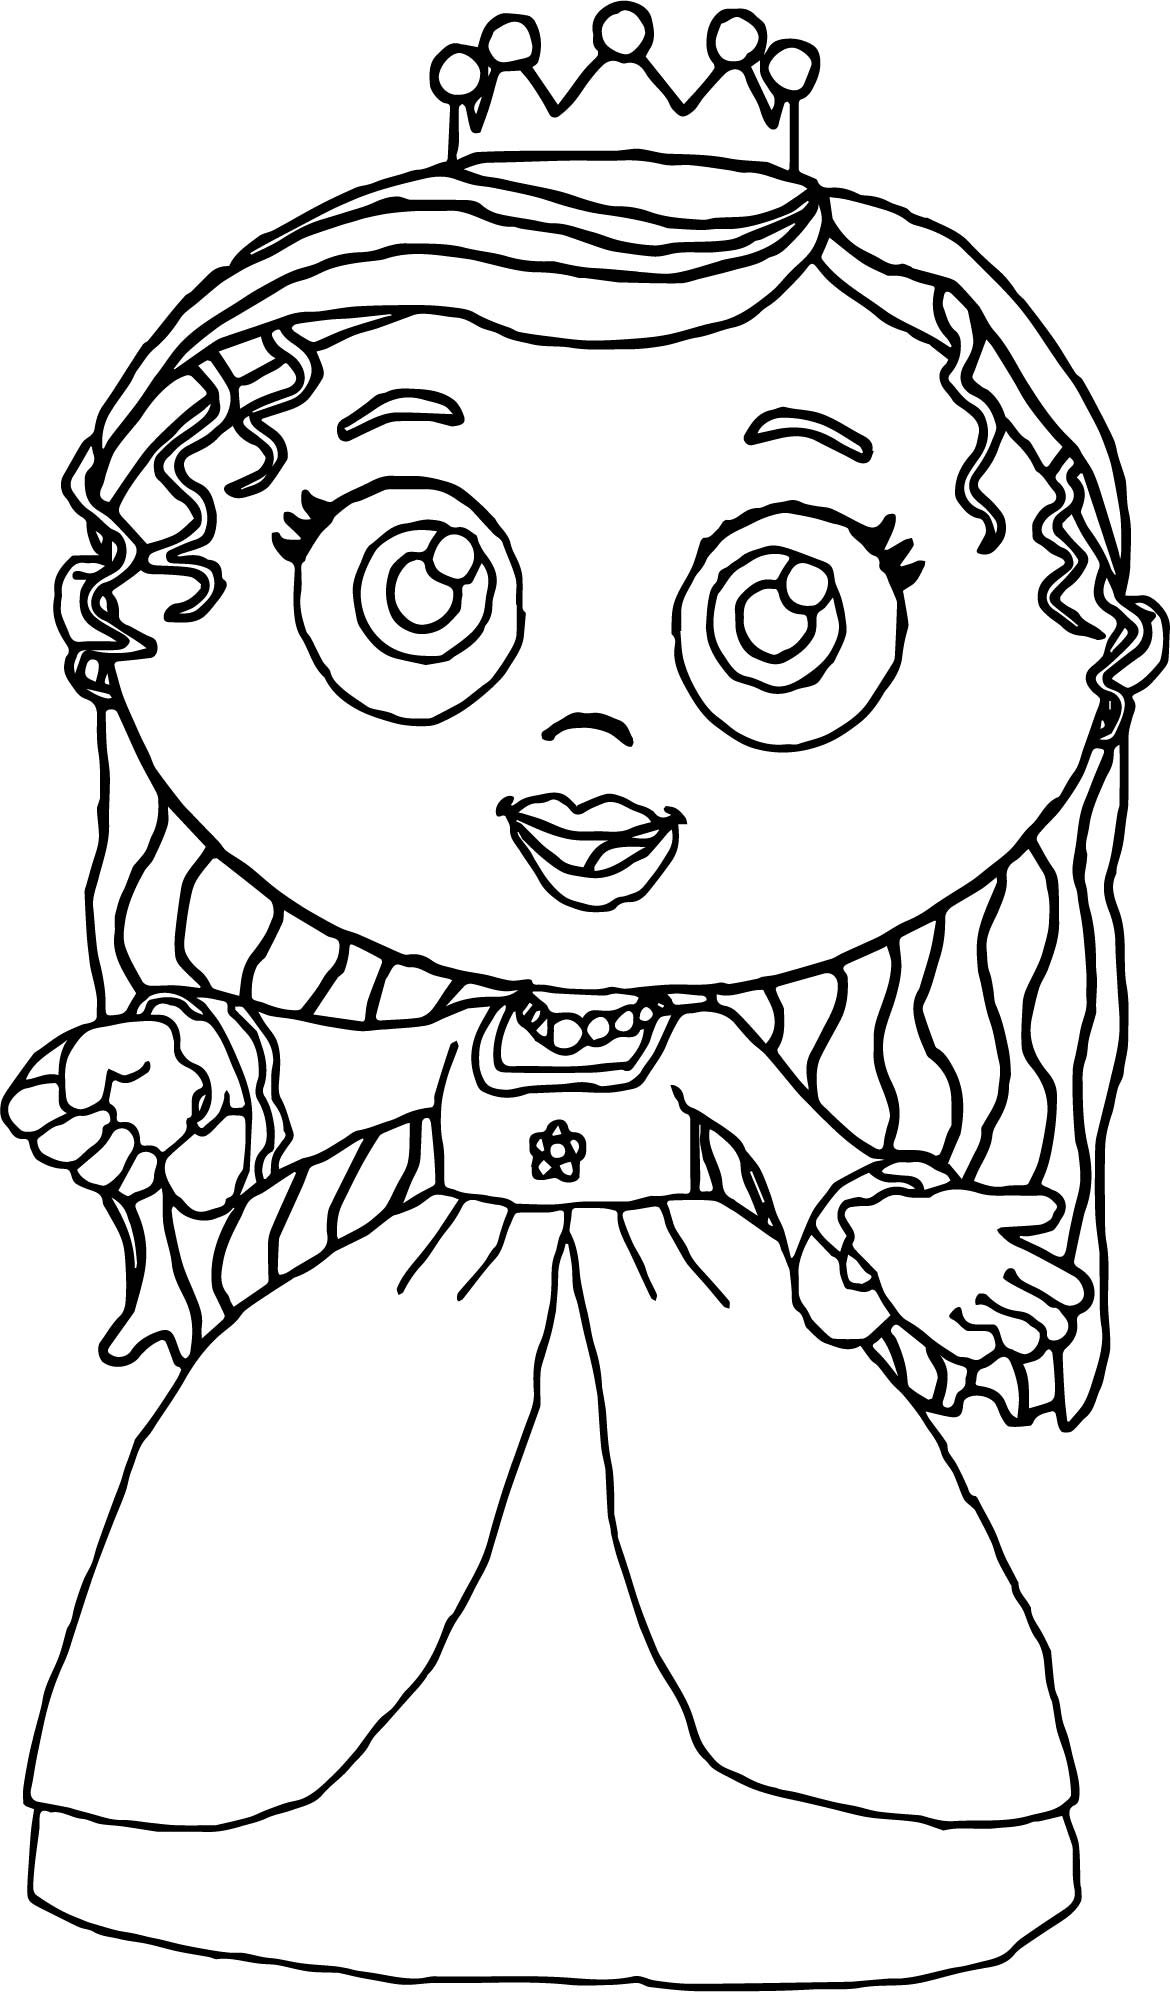 Super Why Coloring Pages - Best Coloring Pages For Kids